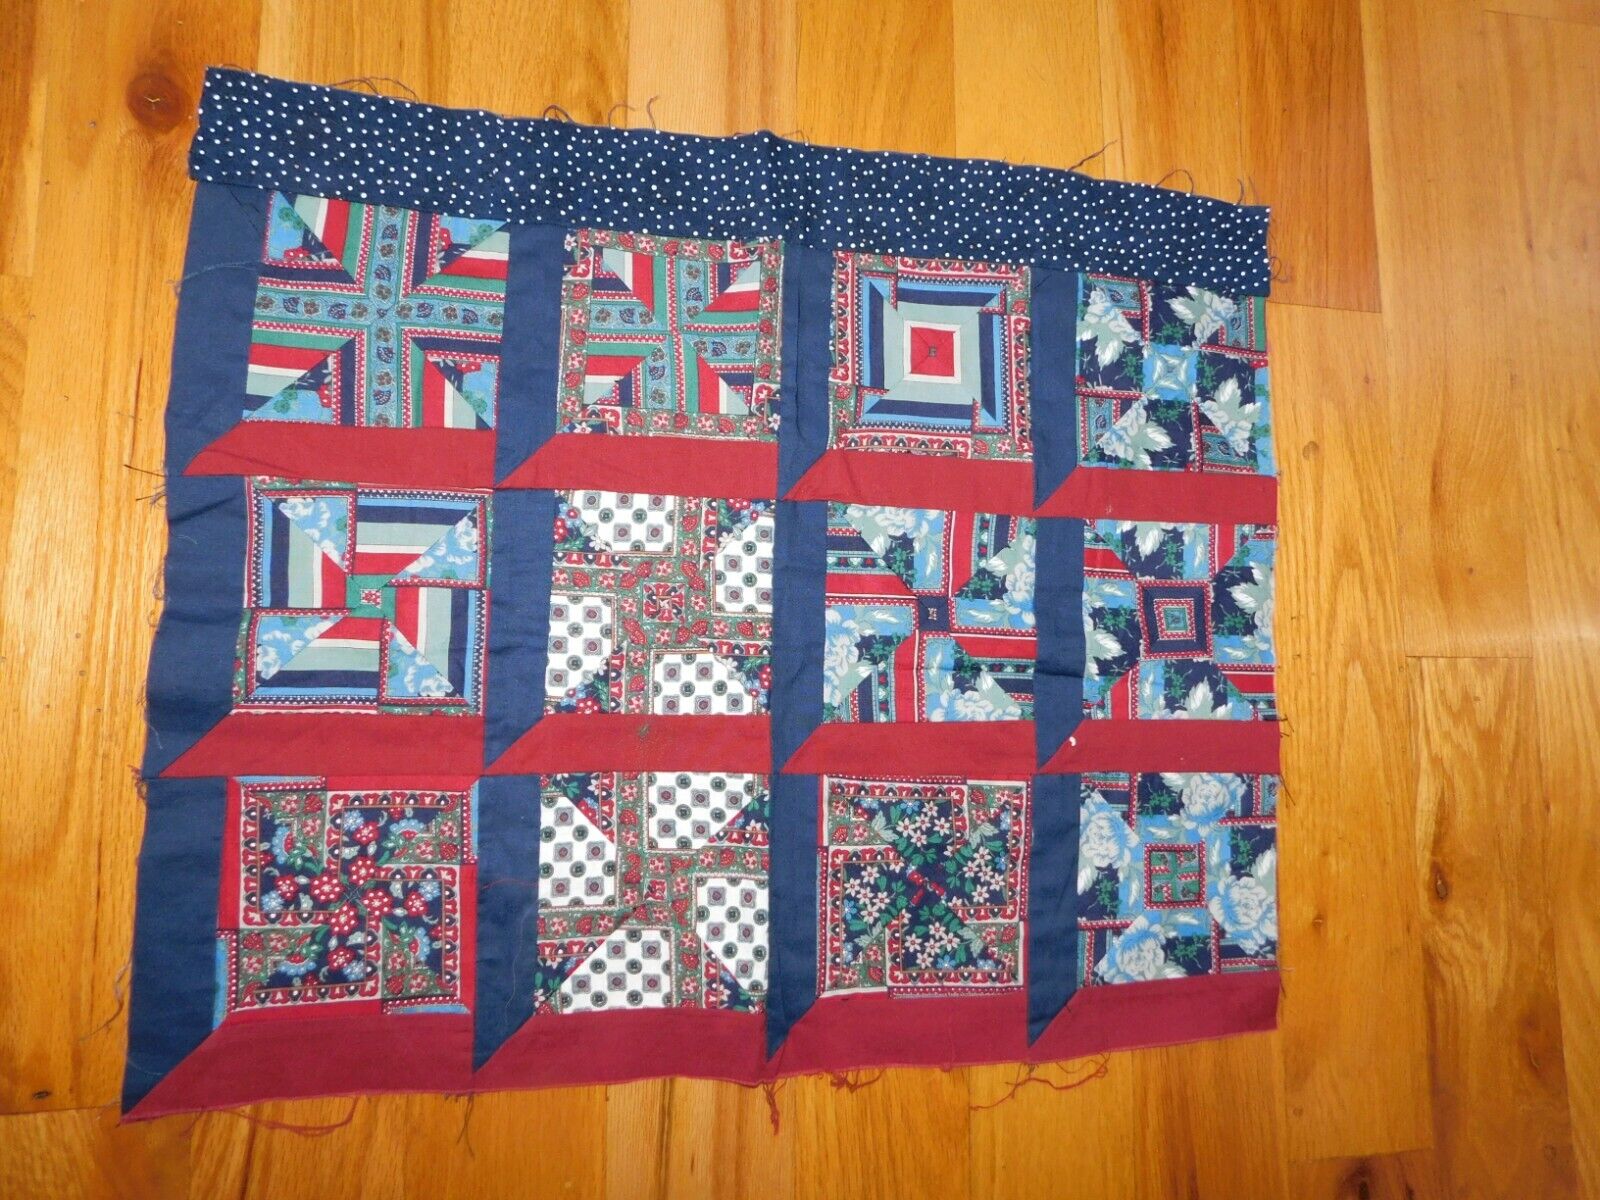 Sampler Quilt Top Handmade Navy Blue & Red Prints 20 x 17 Inches